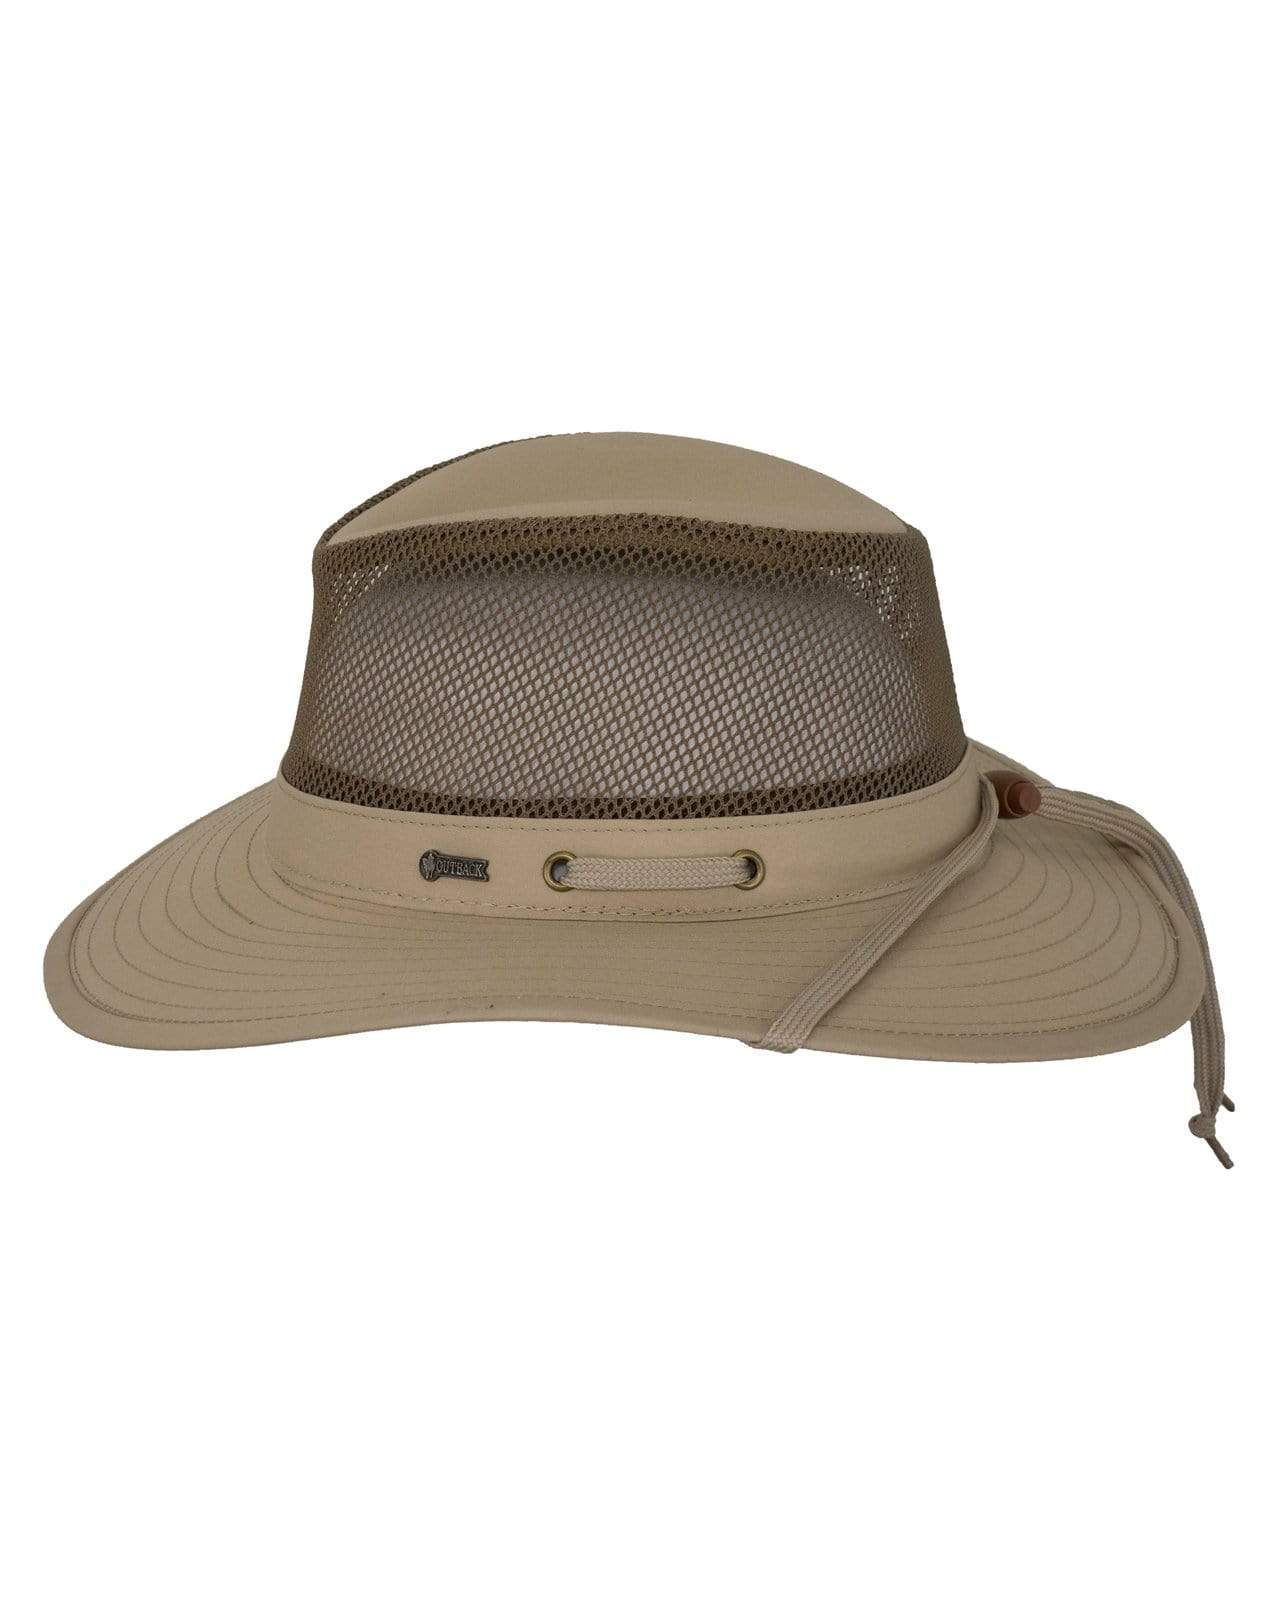 Outback Trading Company River Guide with Mesh II Hats